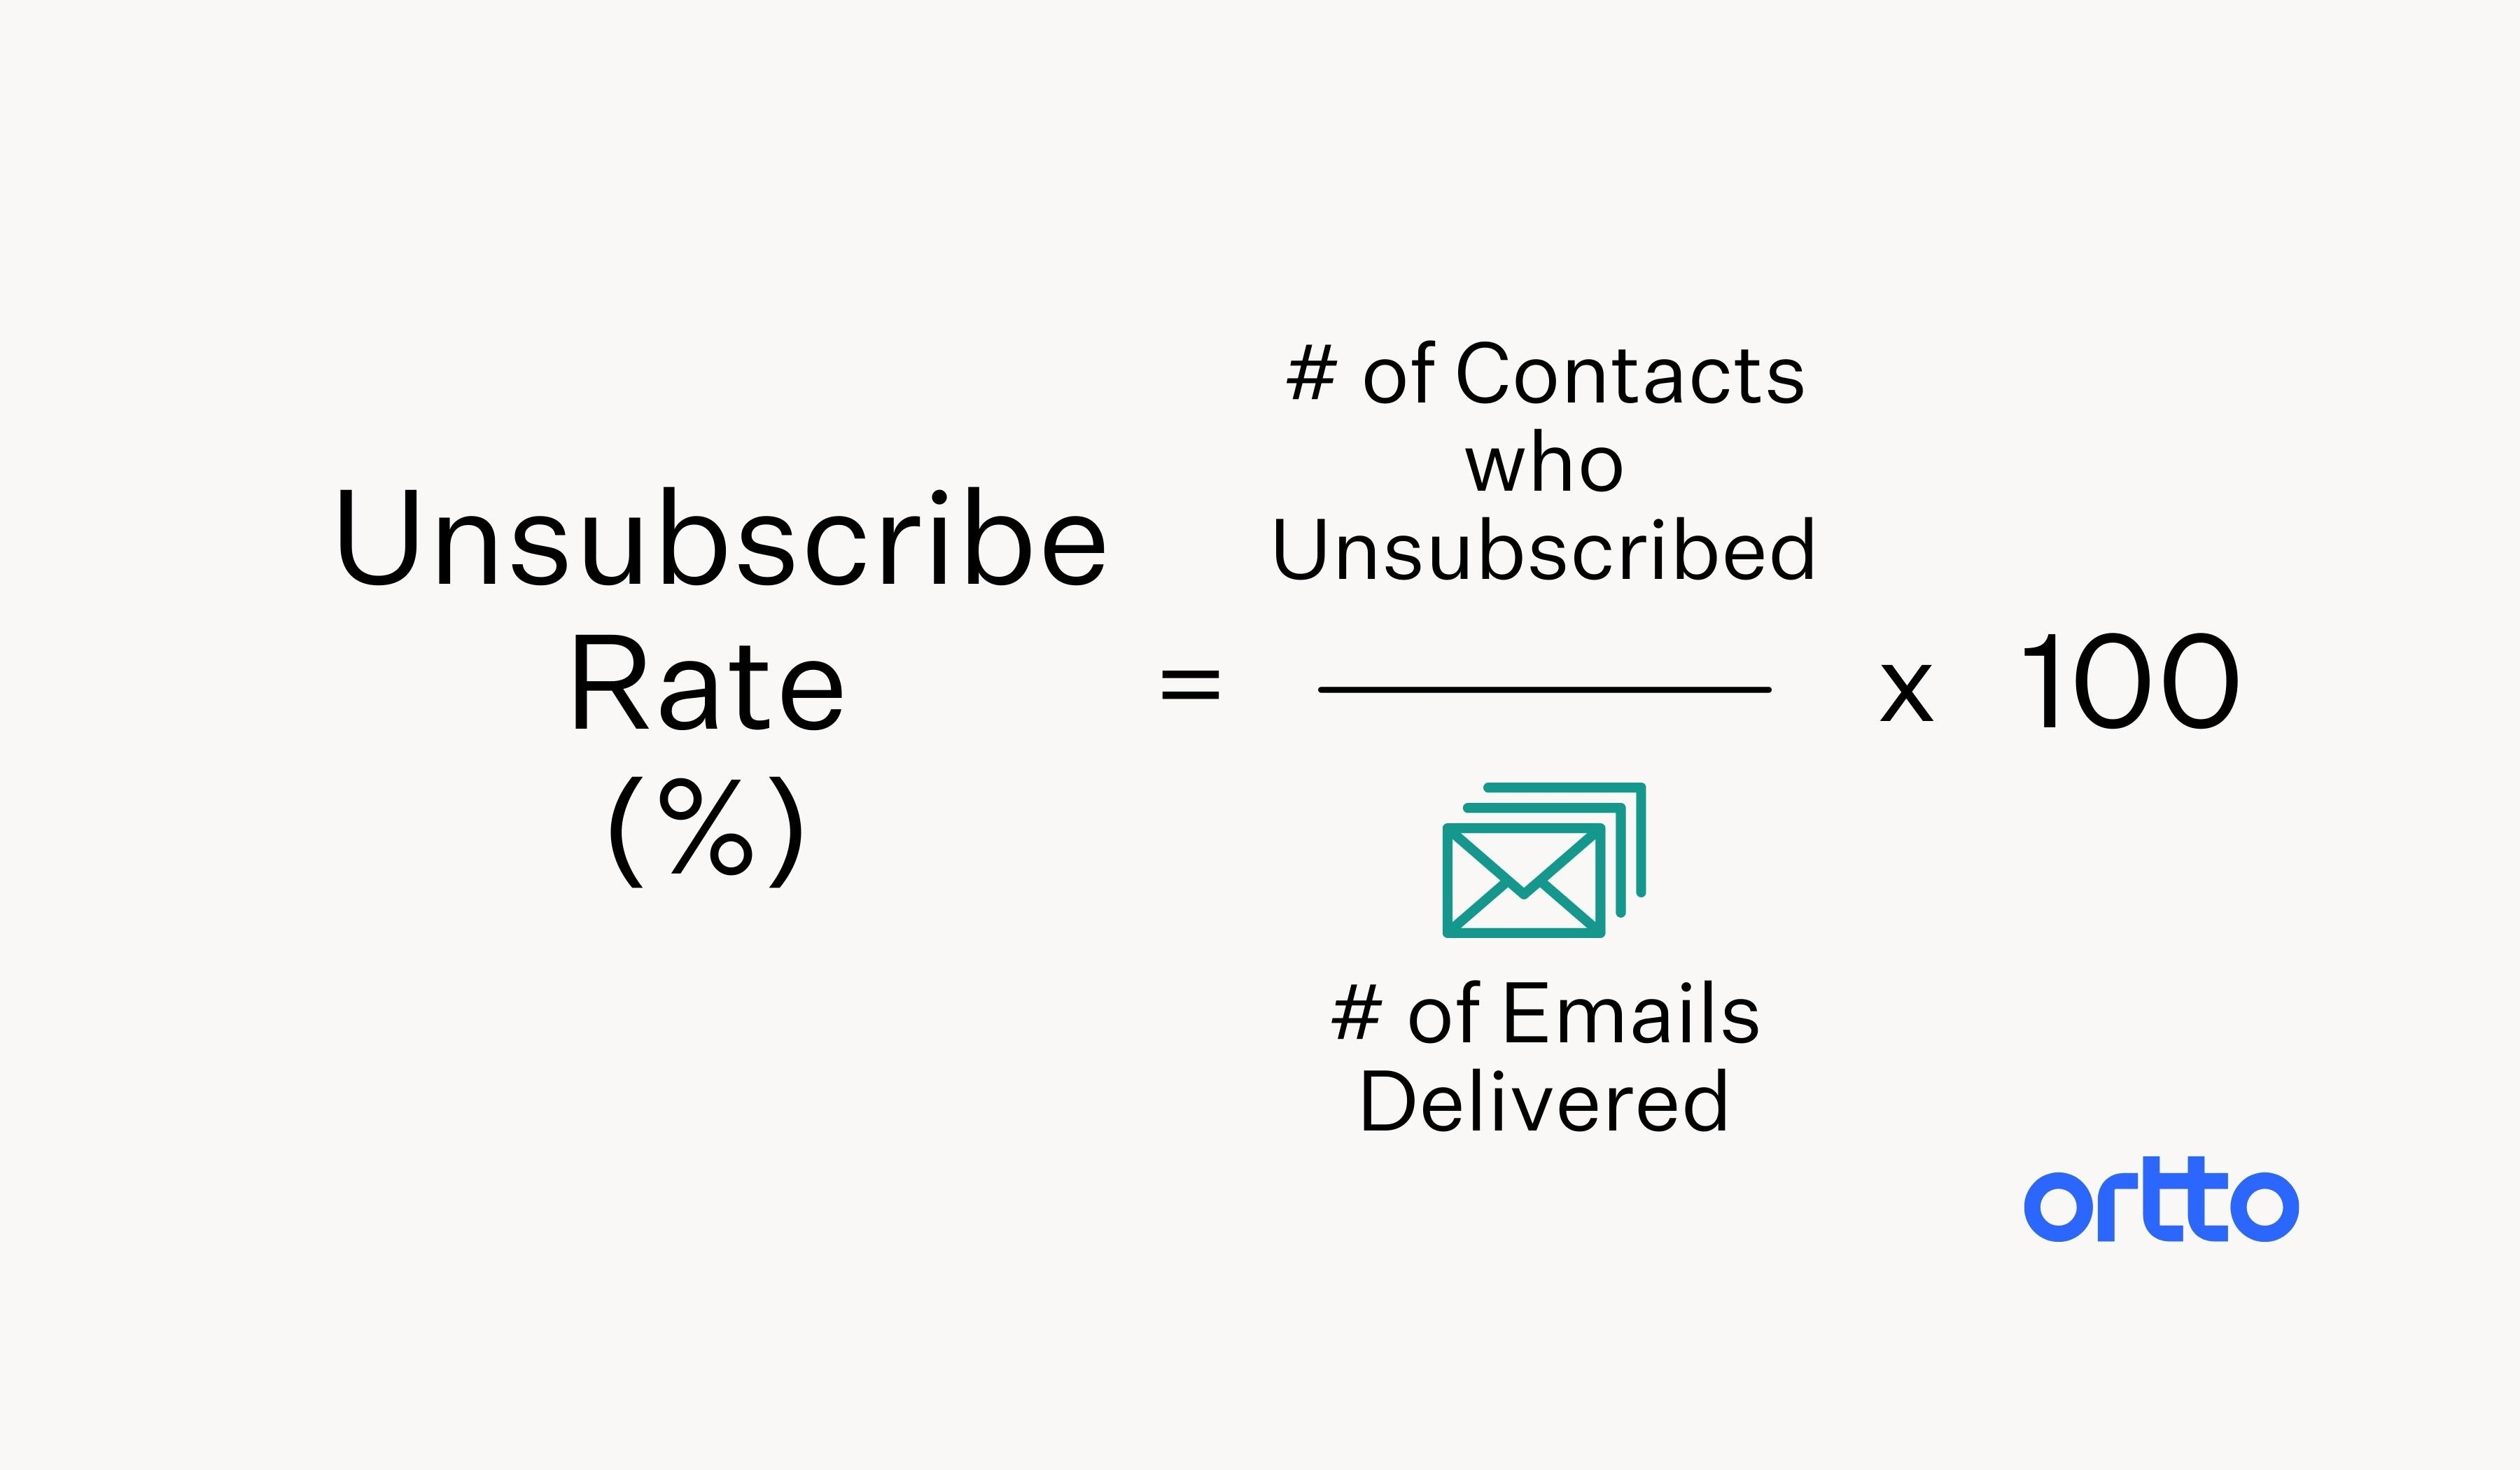 B2b email marketing best practices